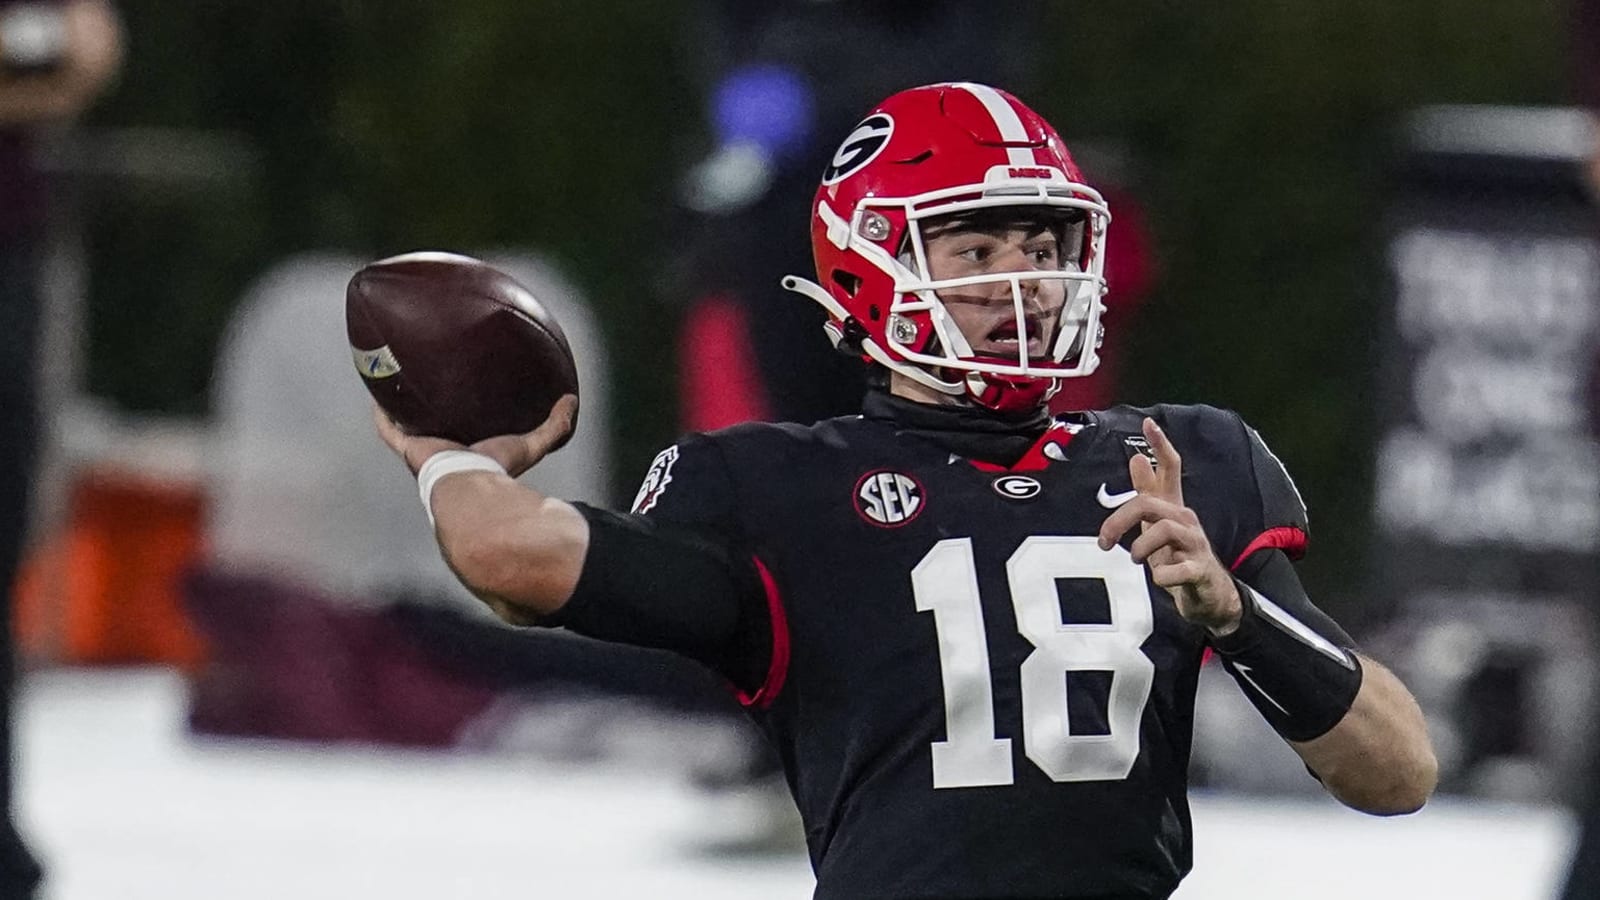 JT Daniels expected to keep Georgia starting QB job after big game